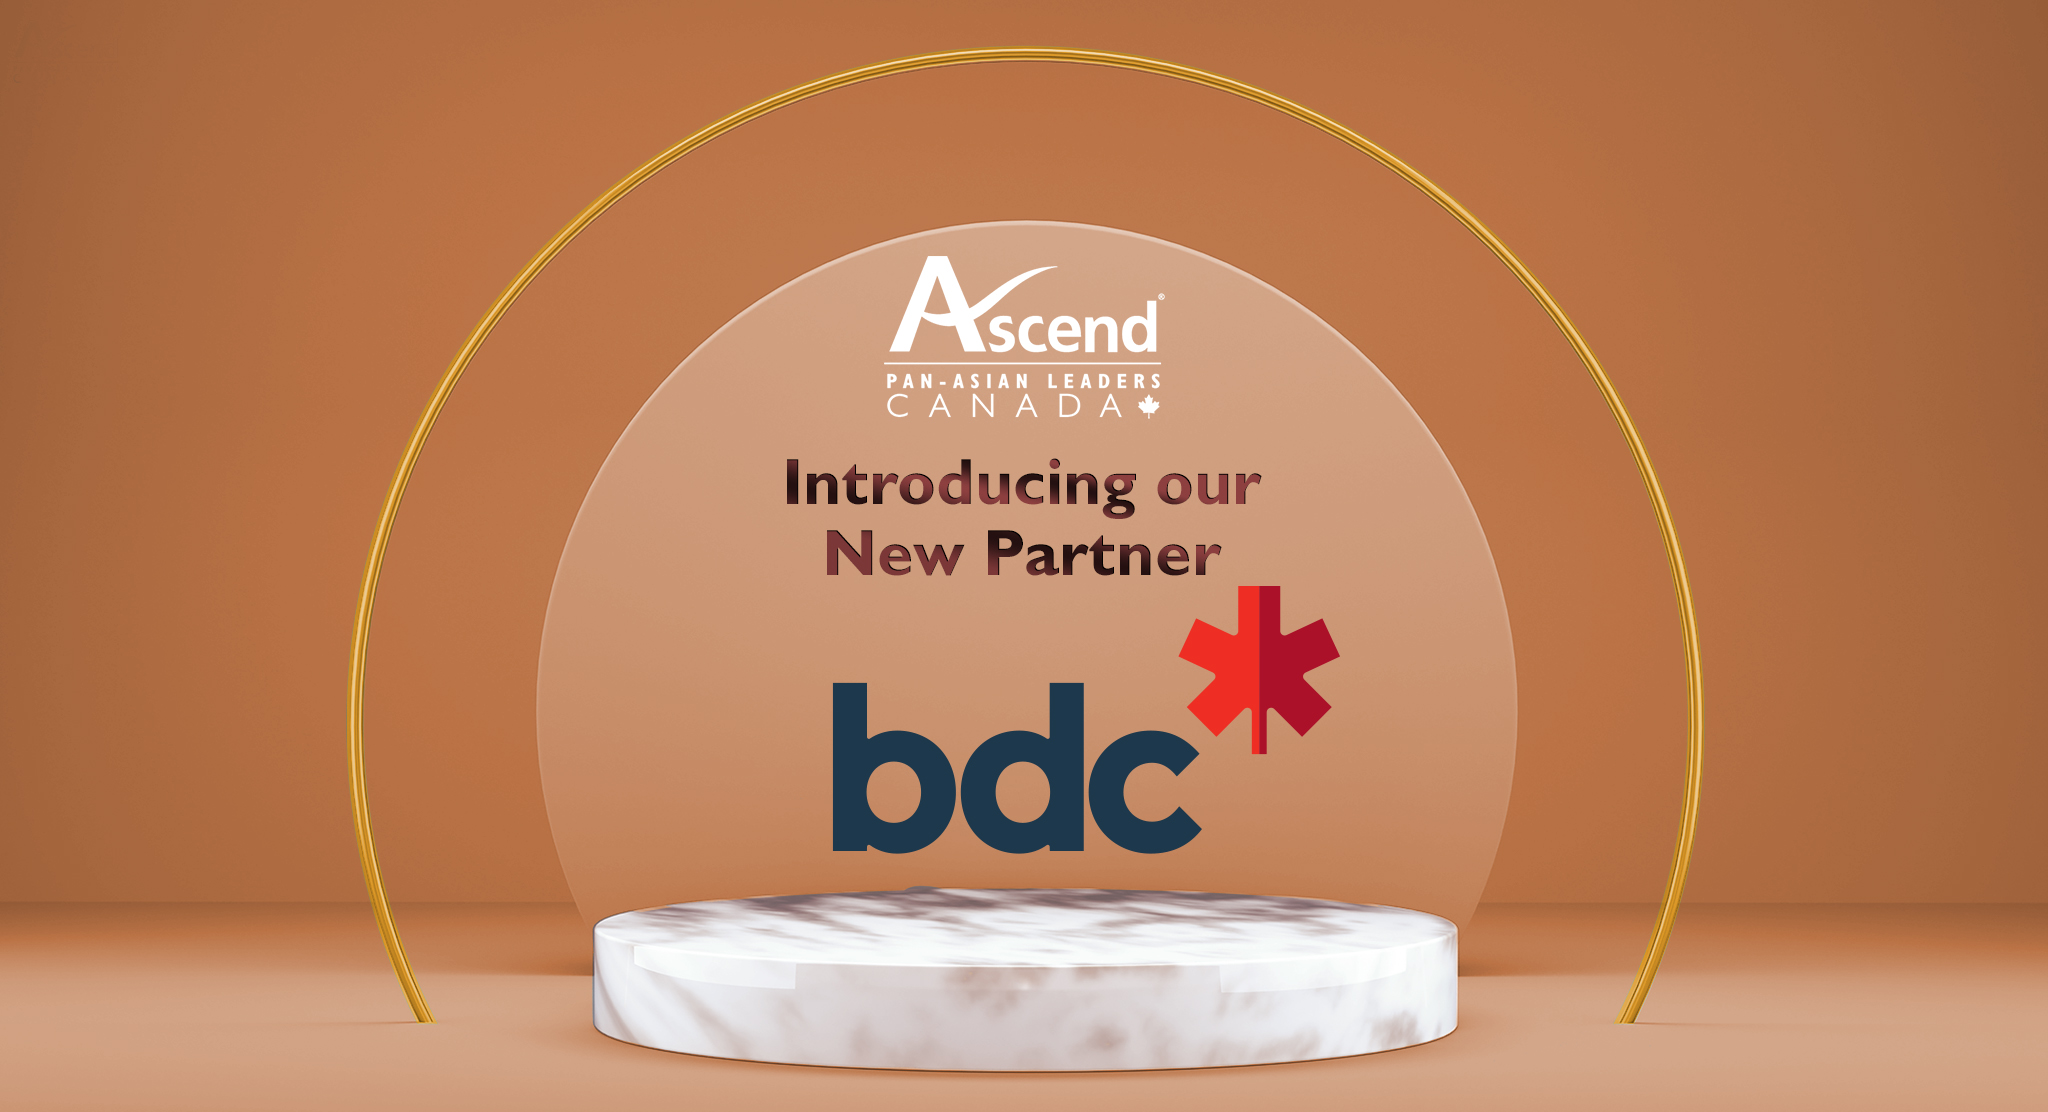 BDC joins Ascend Canada as a Gold Partner